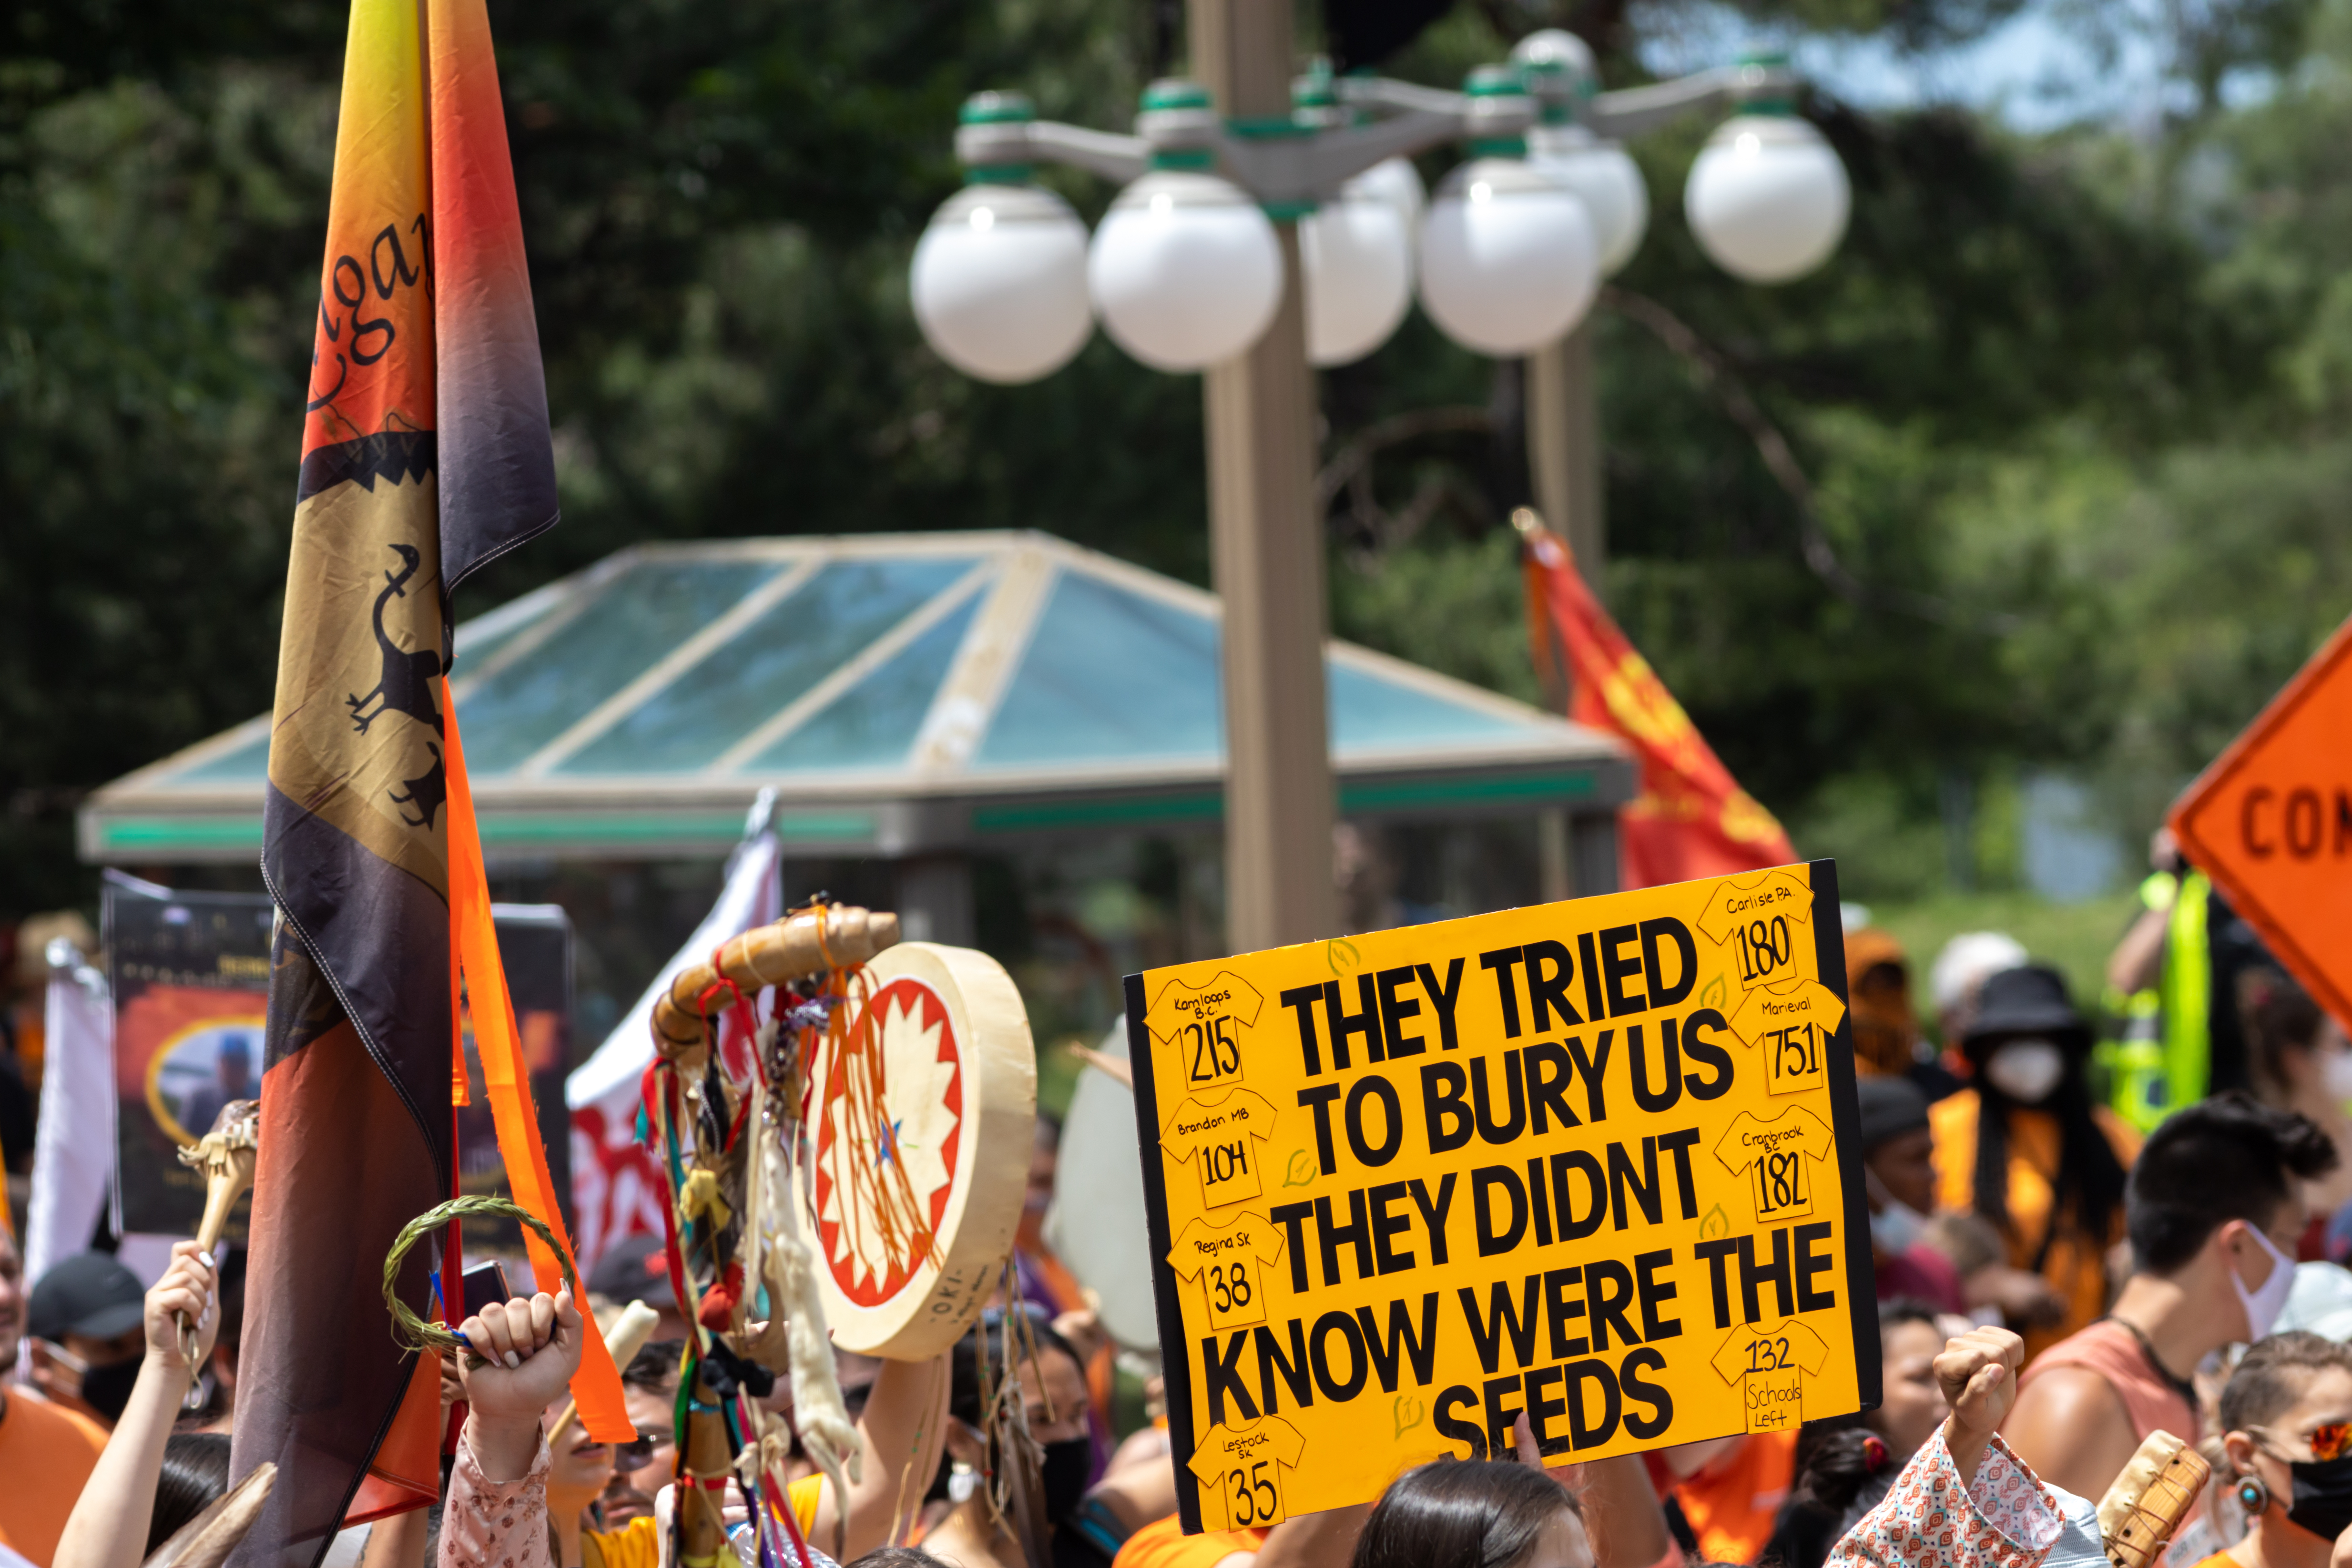 A sign held up at a Canada Day protest against the ill treatment of indigenous people by the Canadian state reads: "They tried to bury us. They didn't know we’re seeds.”   Ontario, Canada, April 2021.